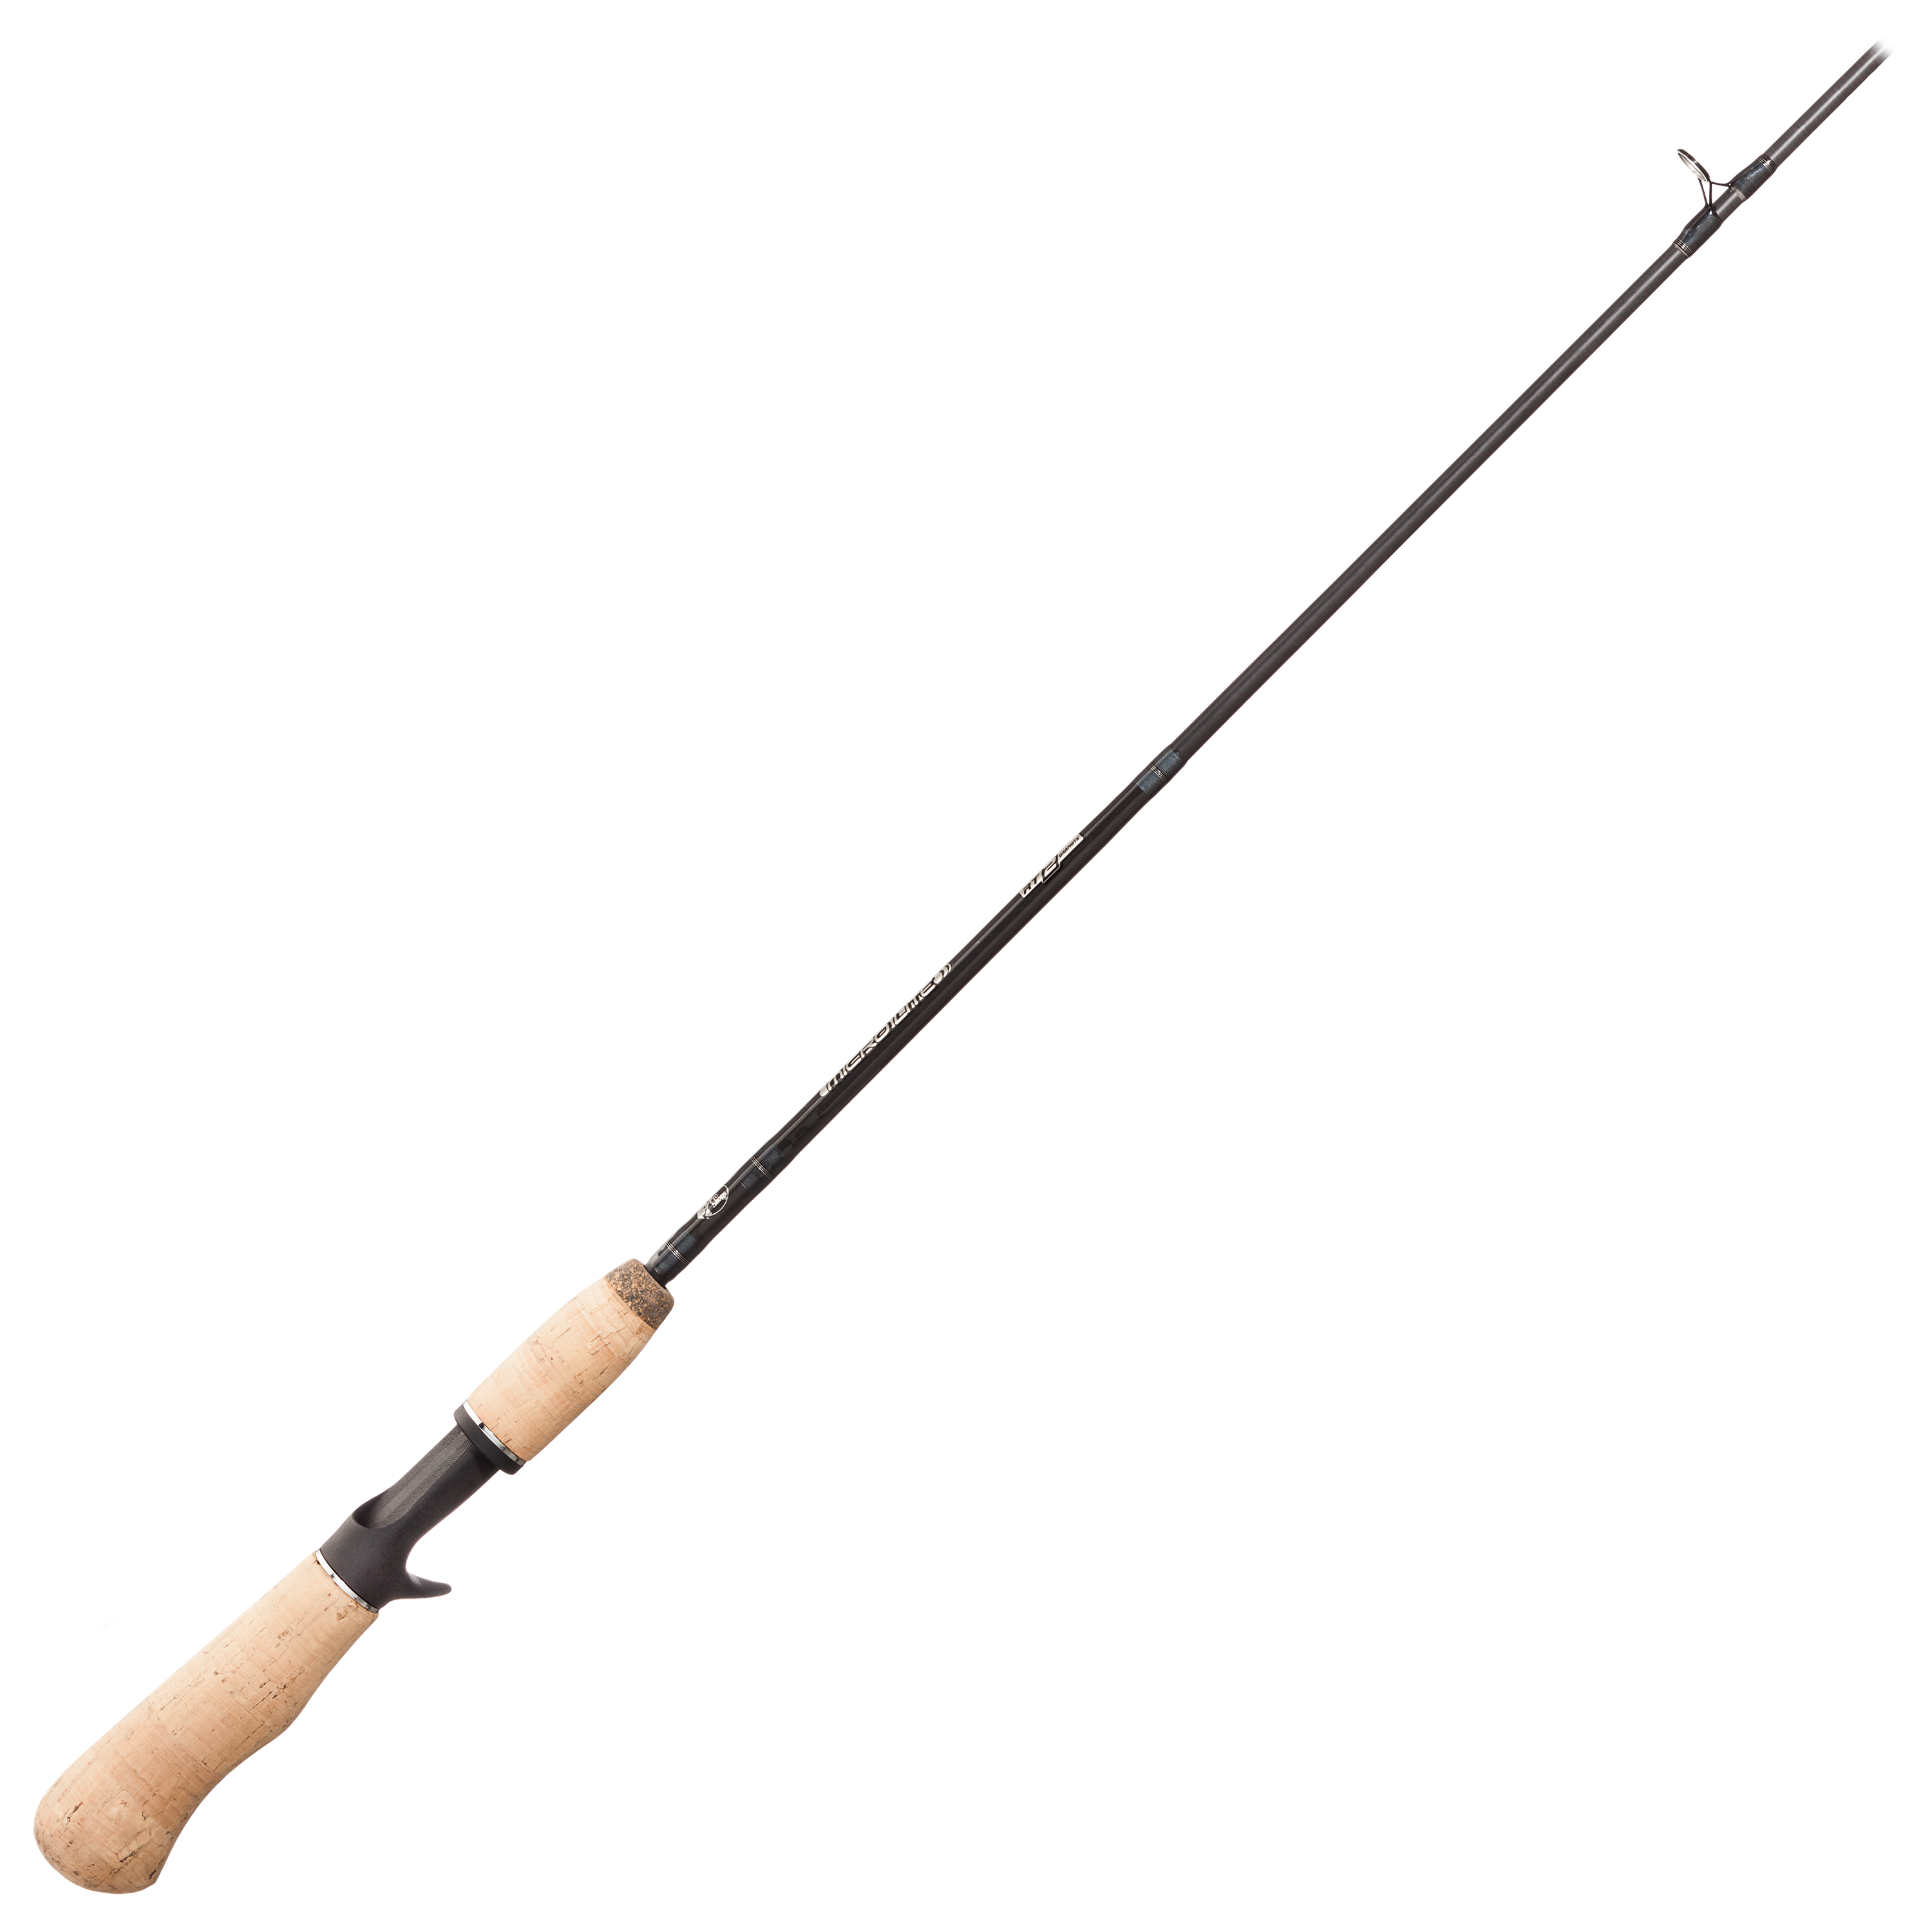 Basspro Micro-Lite Spinning Pack Rod. Graphite 5' 6 Light Action -  Backpacking Light